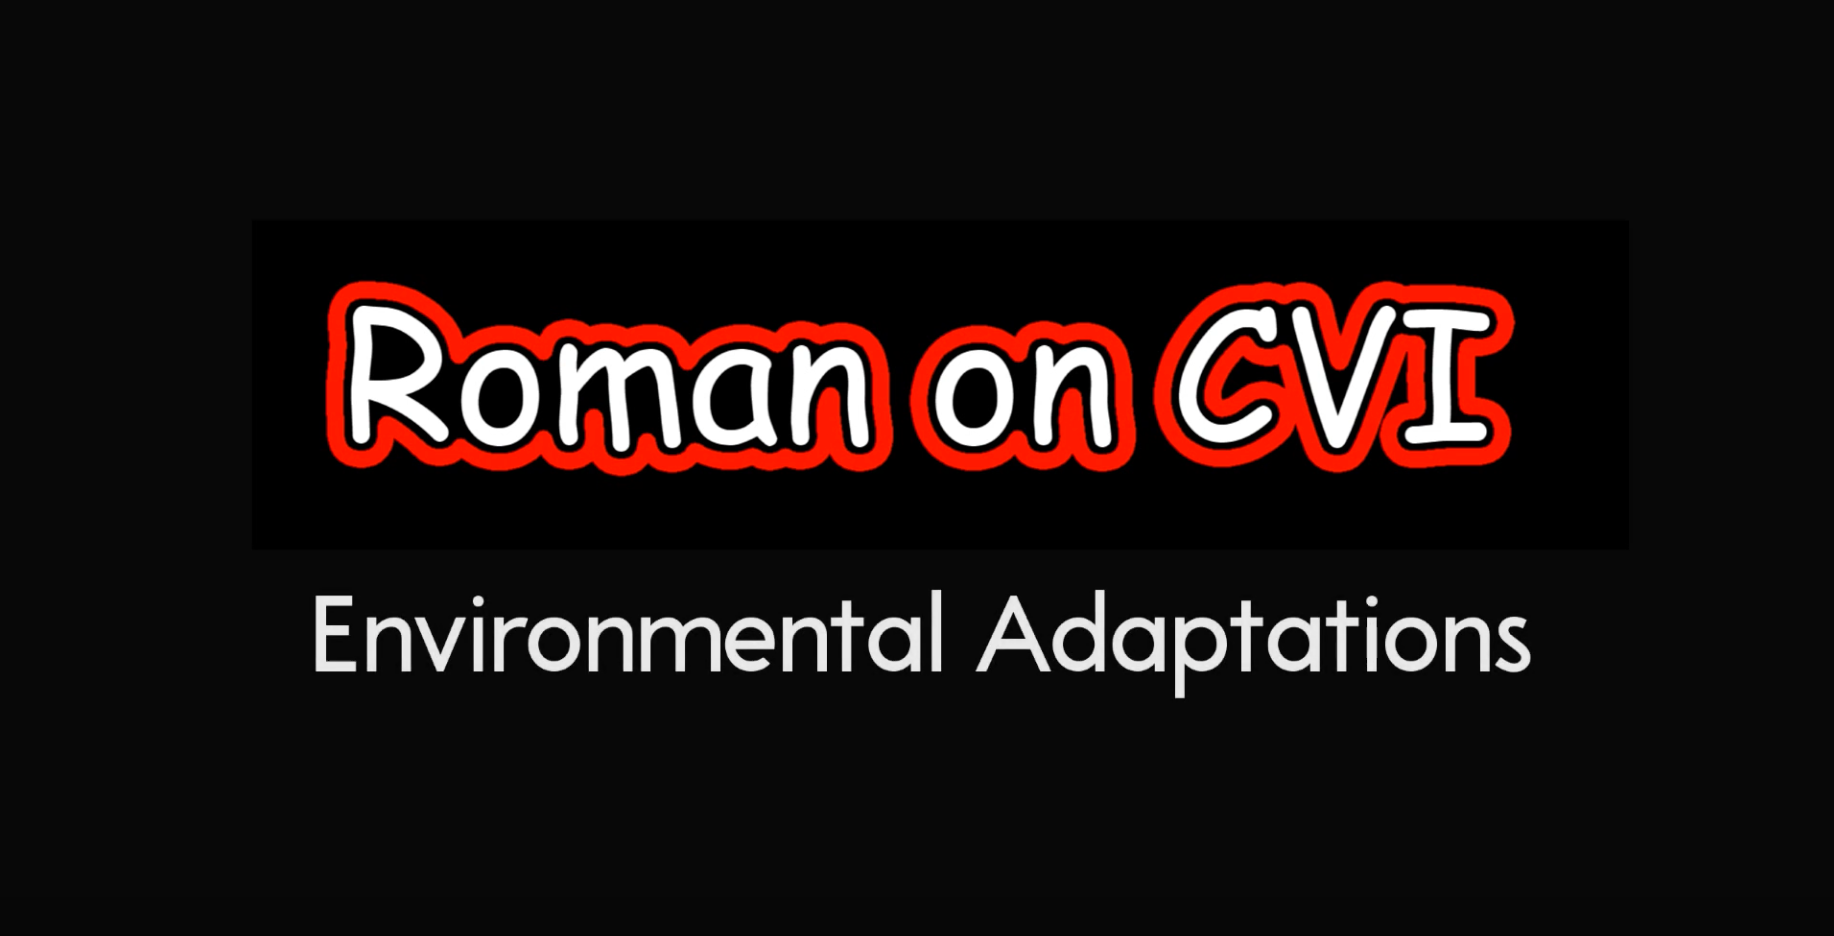 "Roman on CVI" as red bubble words with subtitle: Environmental Adaptations